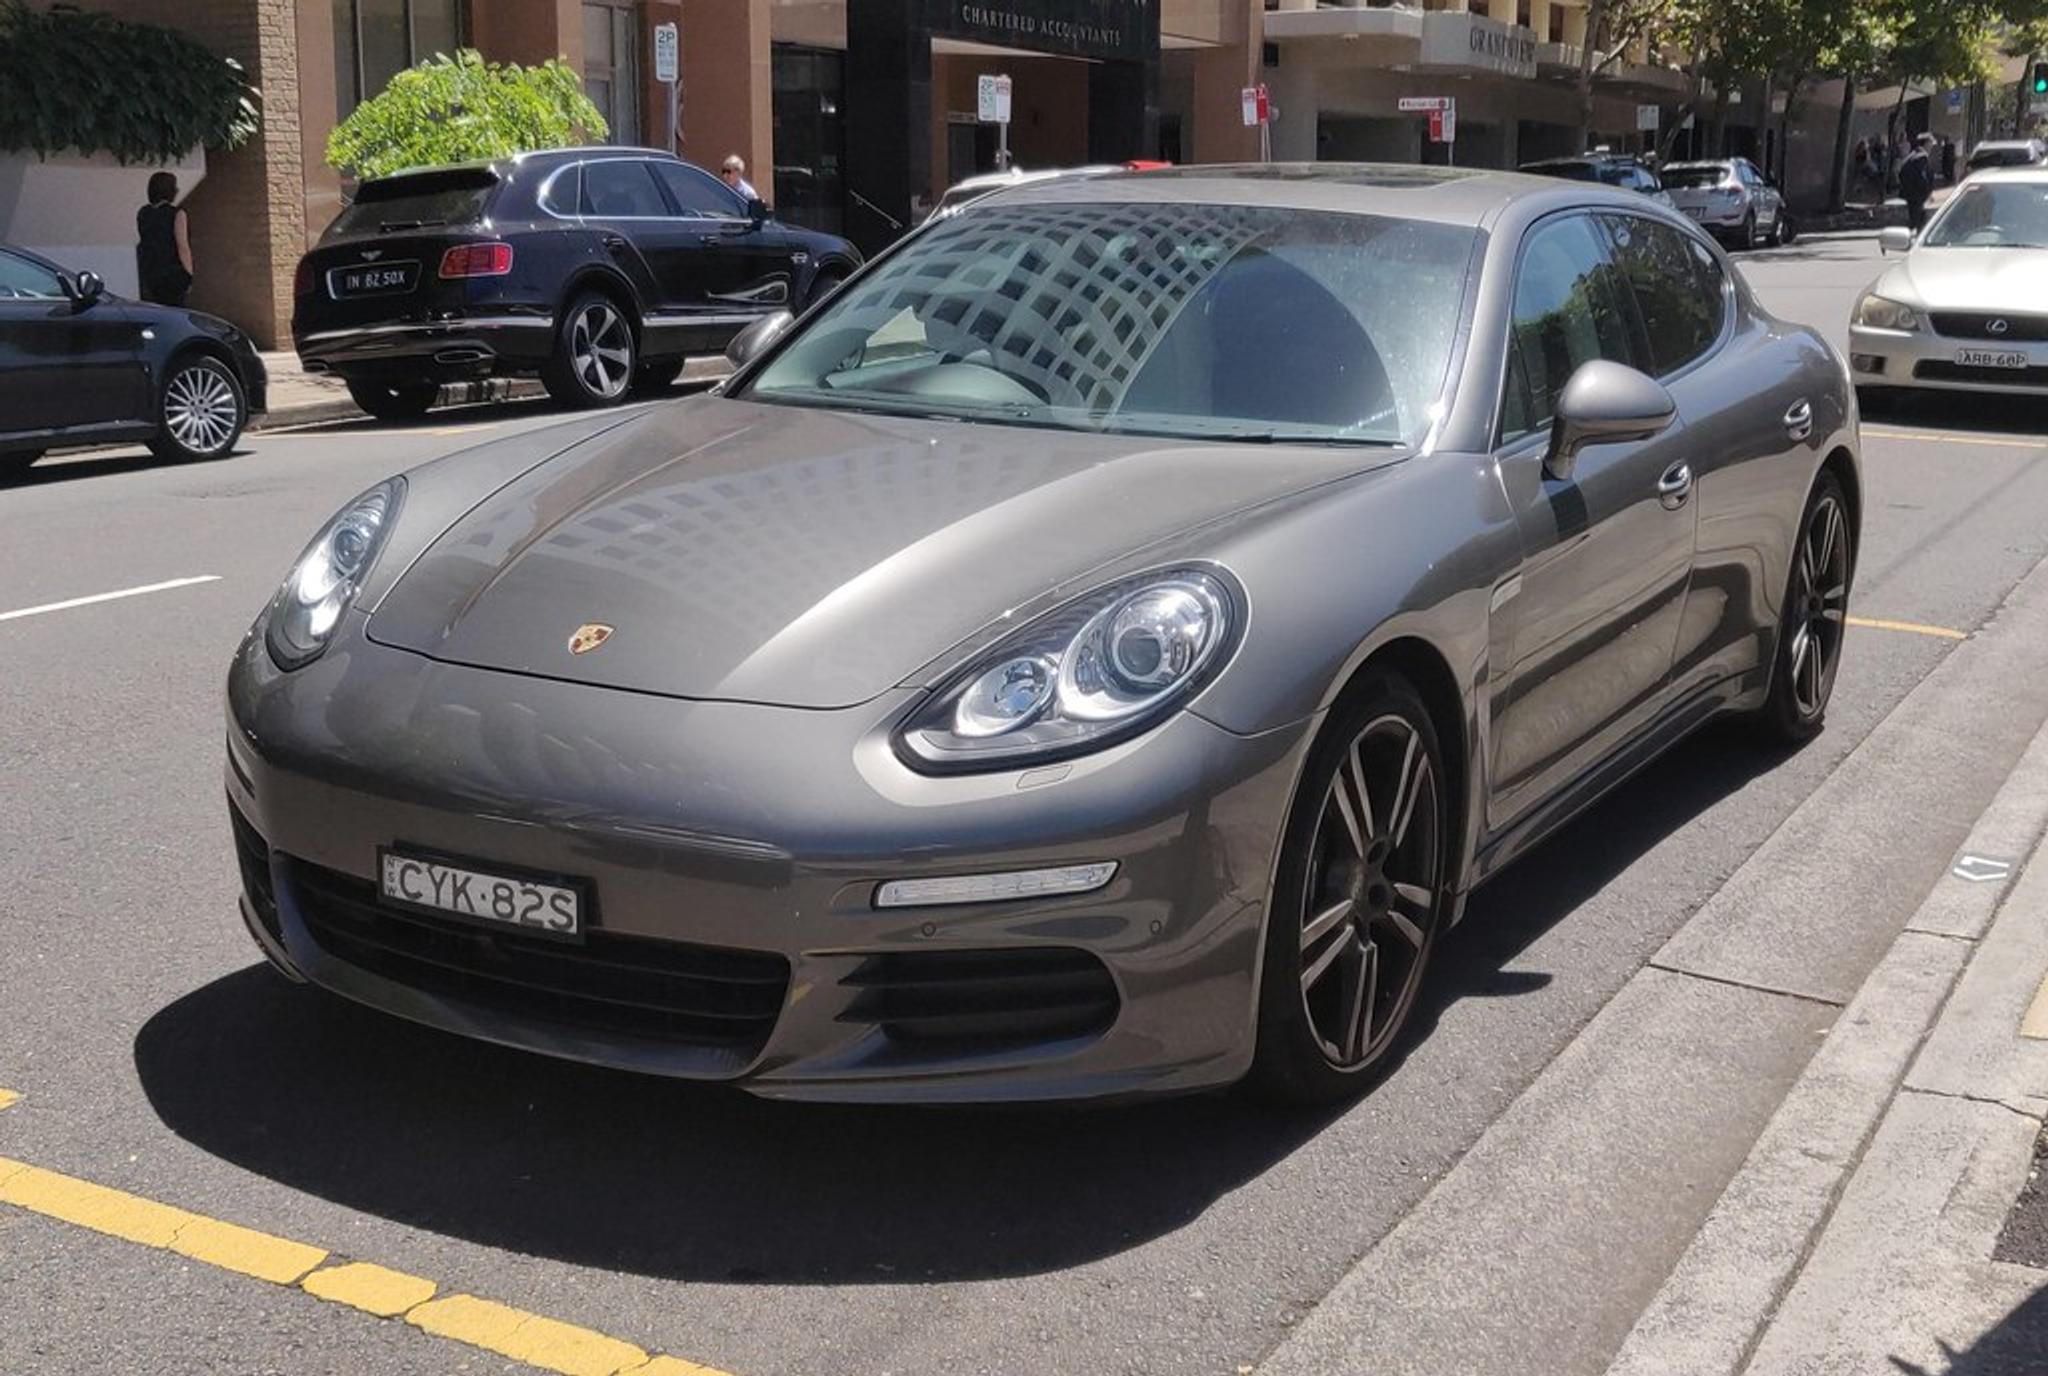 Light brown Porsche Panamera by the side of the road